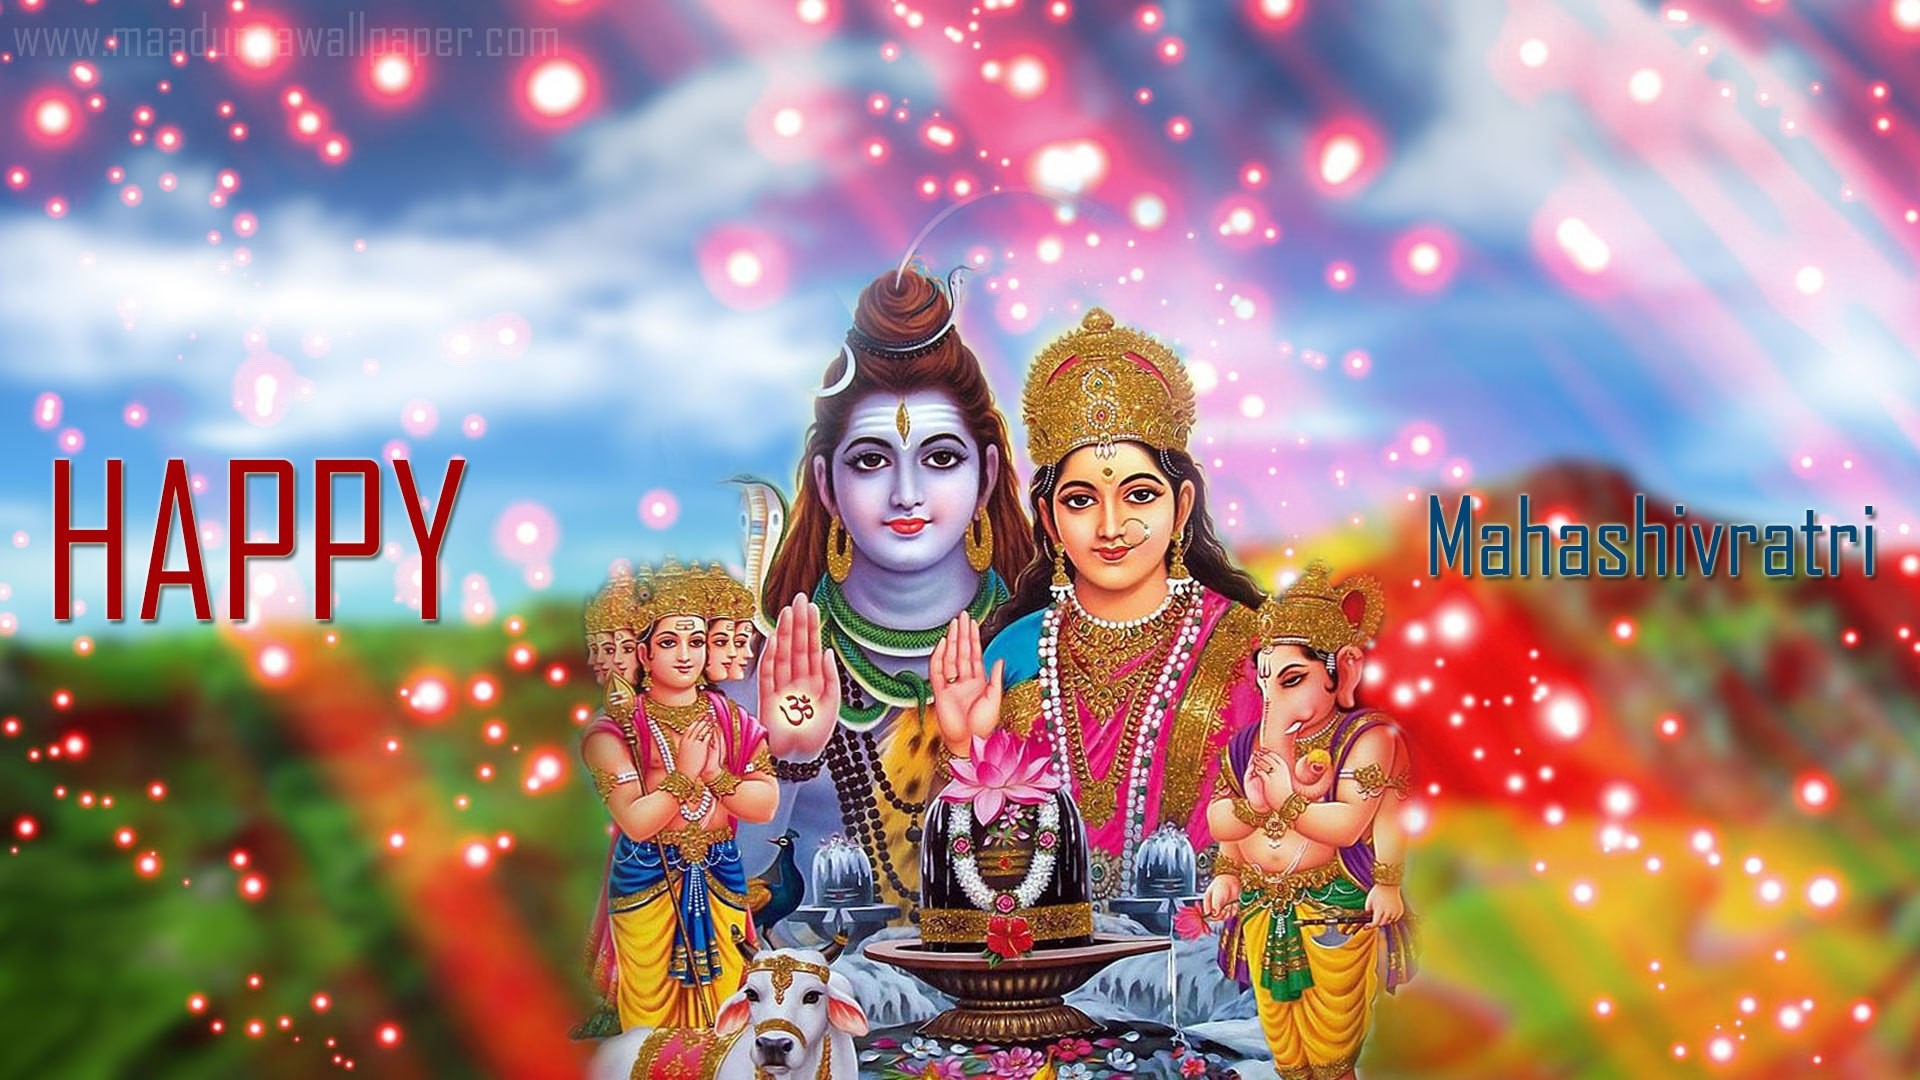 Lord shiva family Wallpapers Download | MobCup